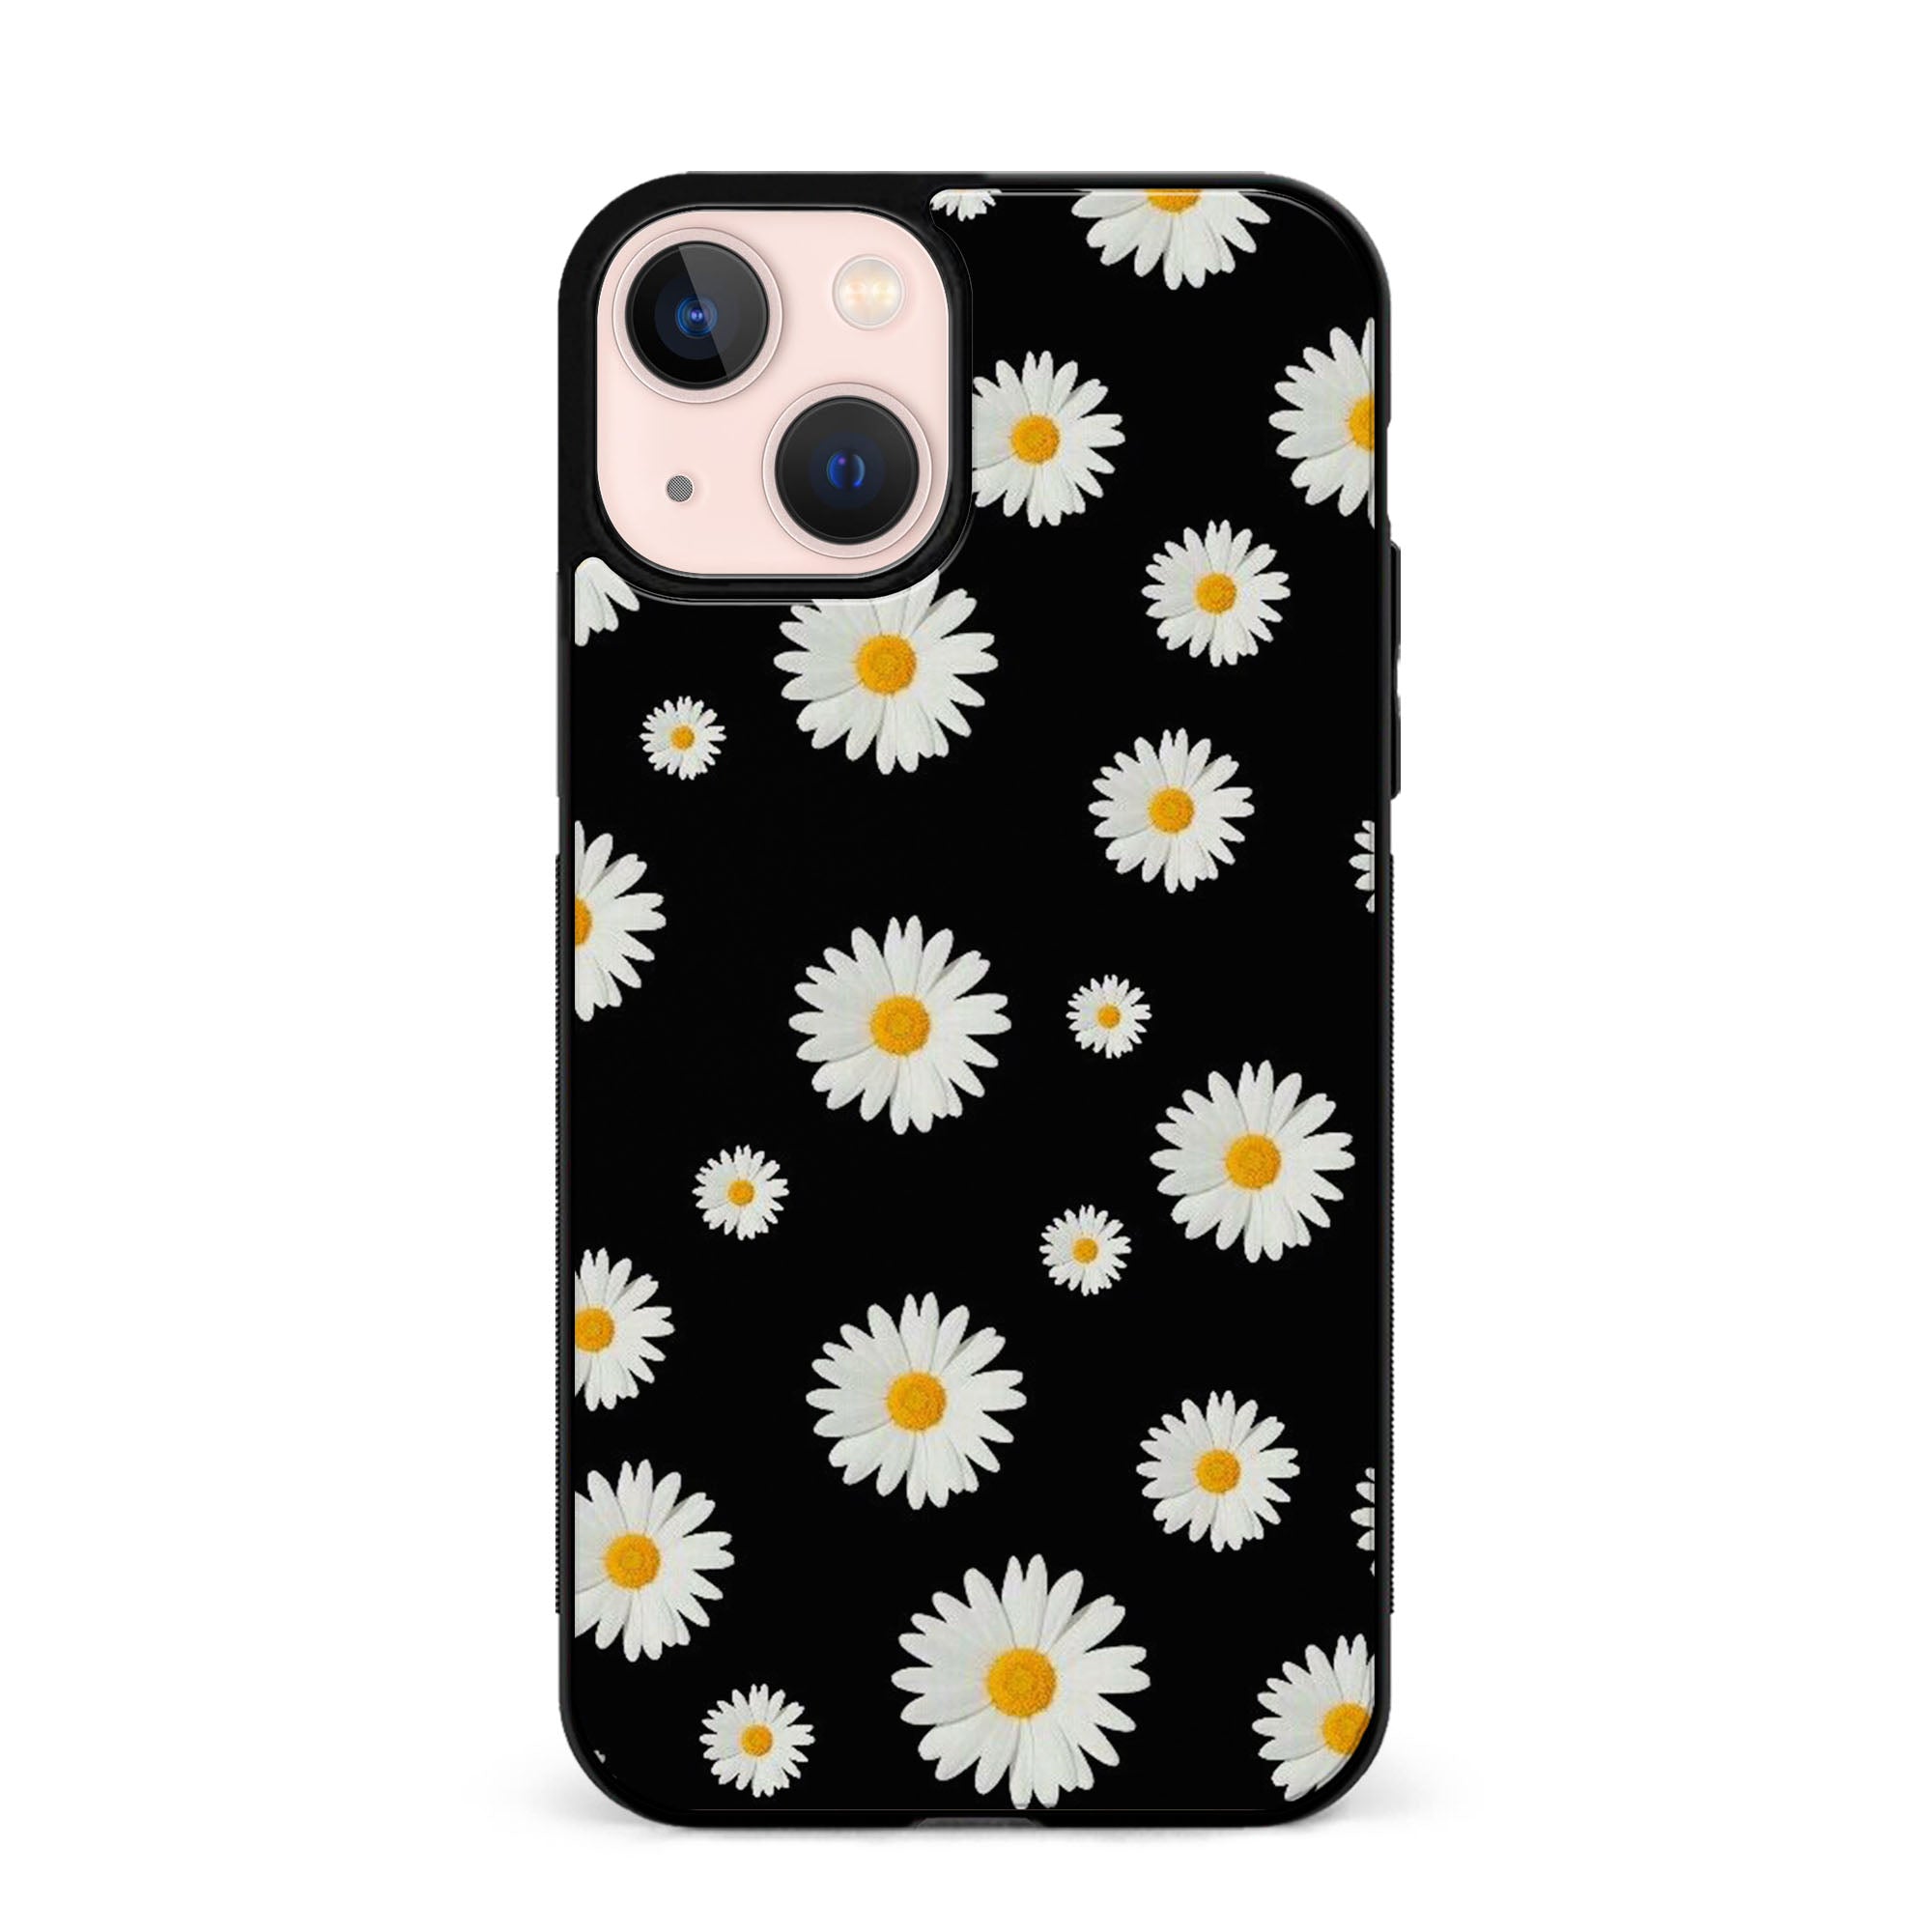 Daisies On Black Rubber Phone Case for iPhone, Samsung, Huawei & Pixel